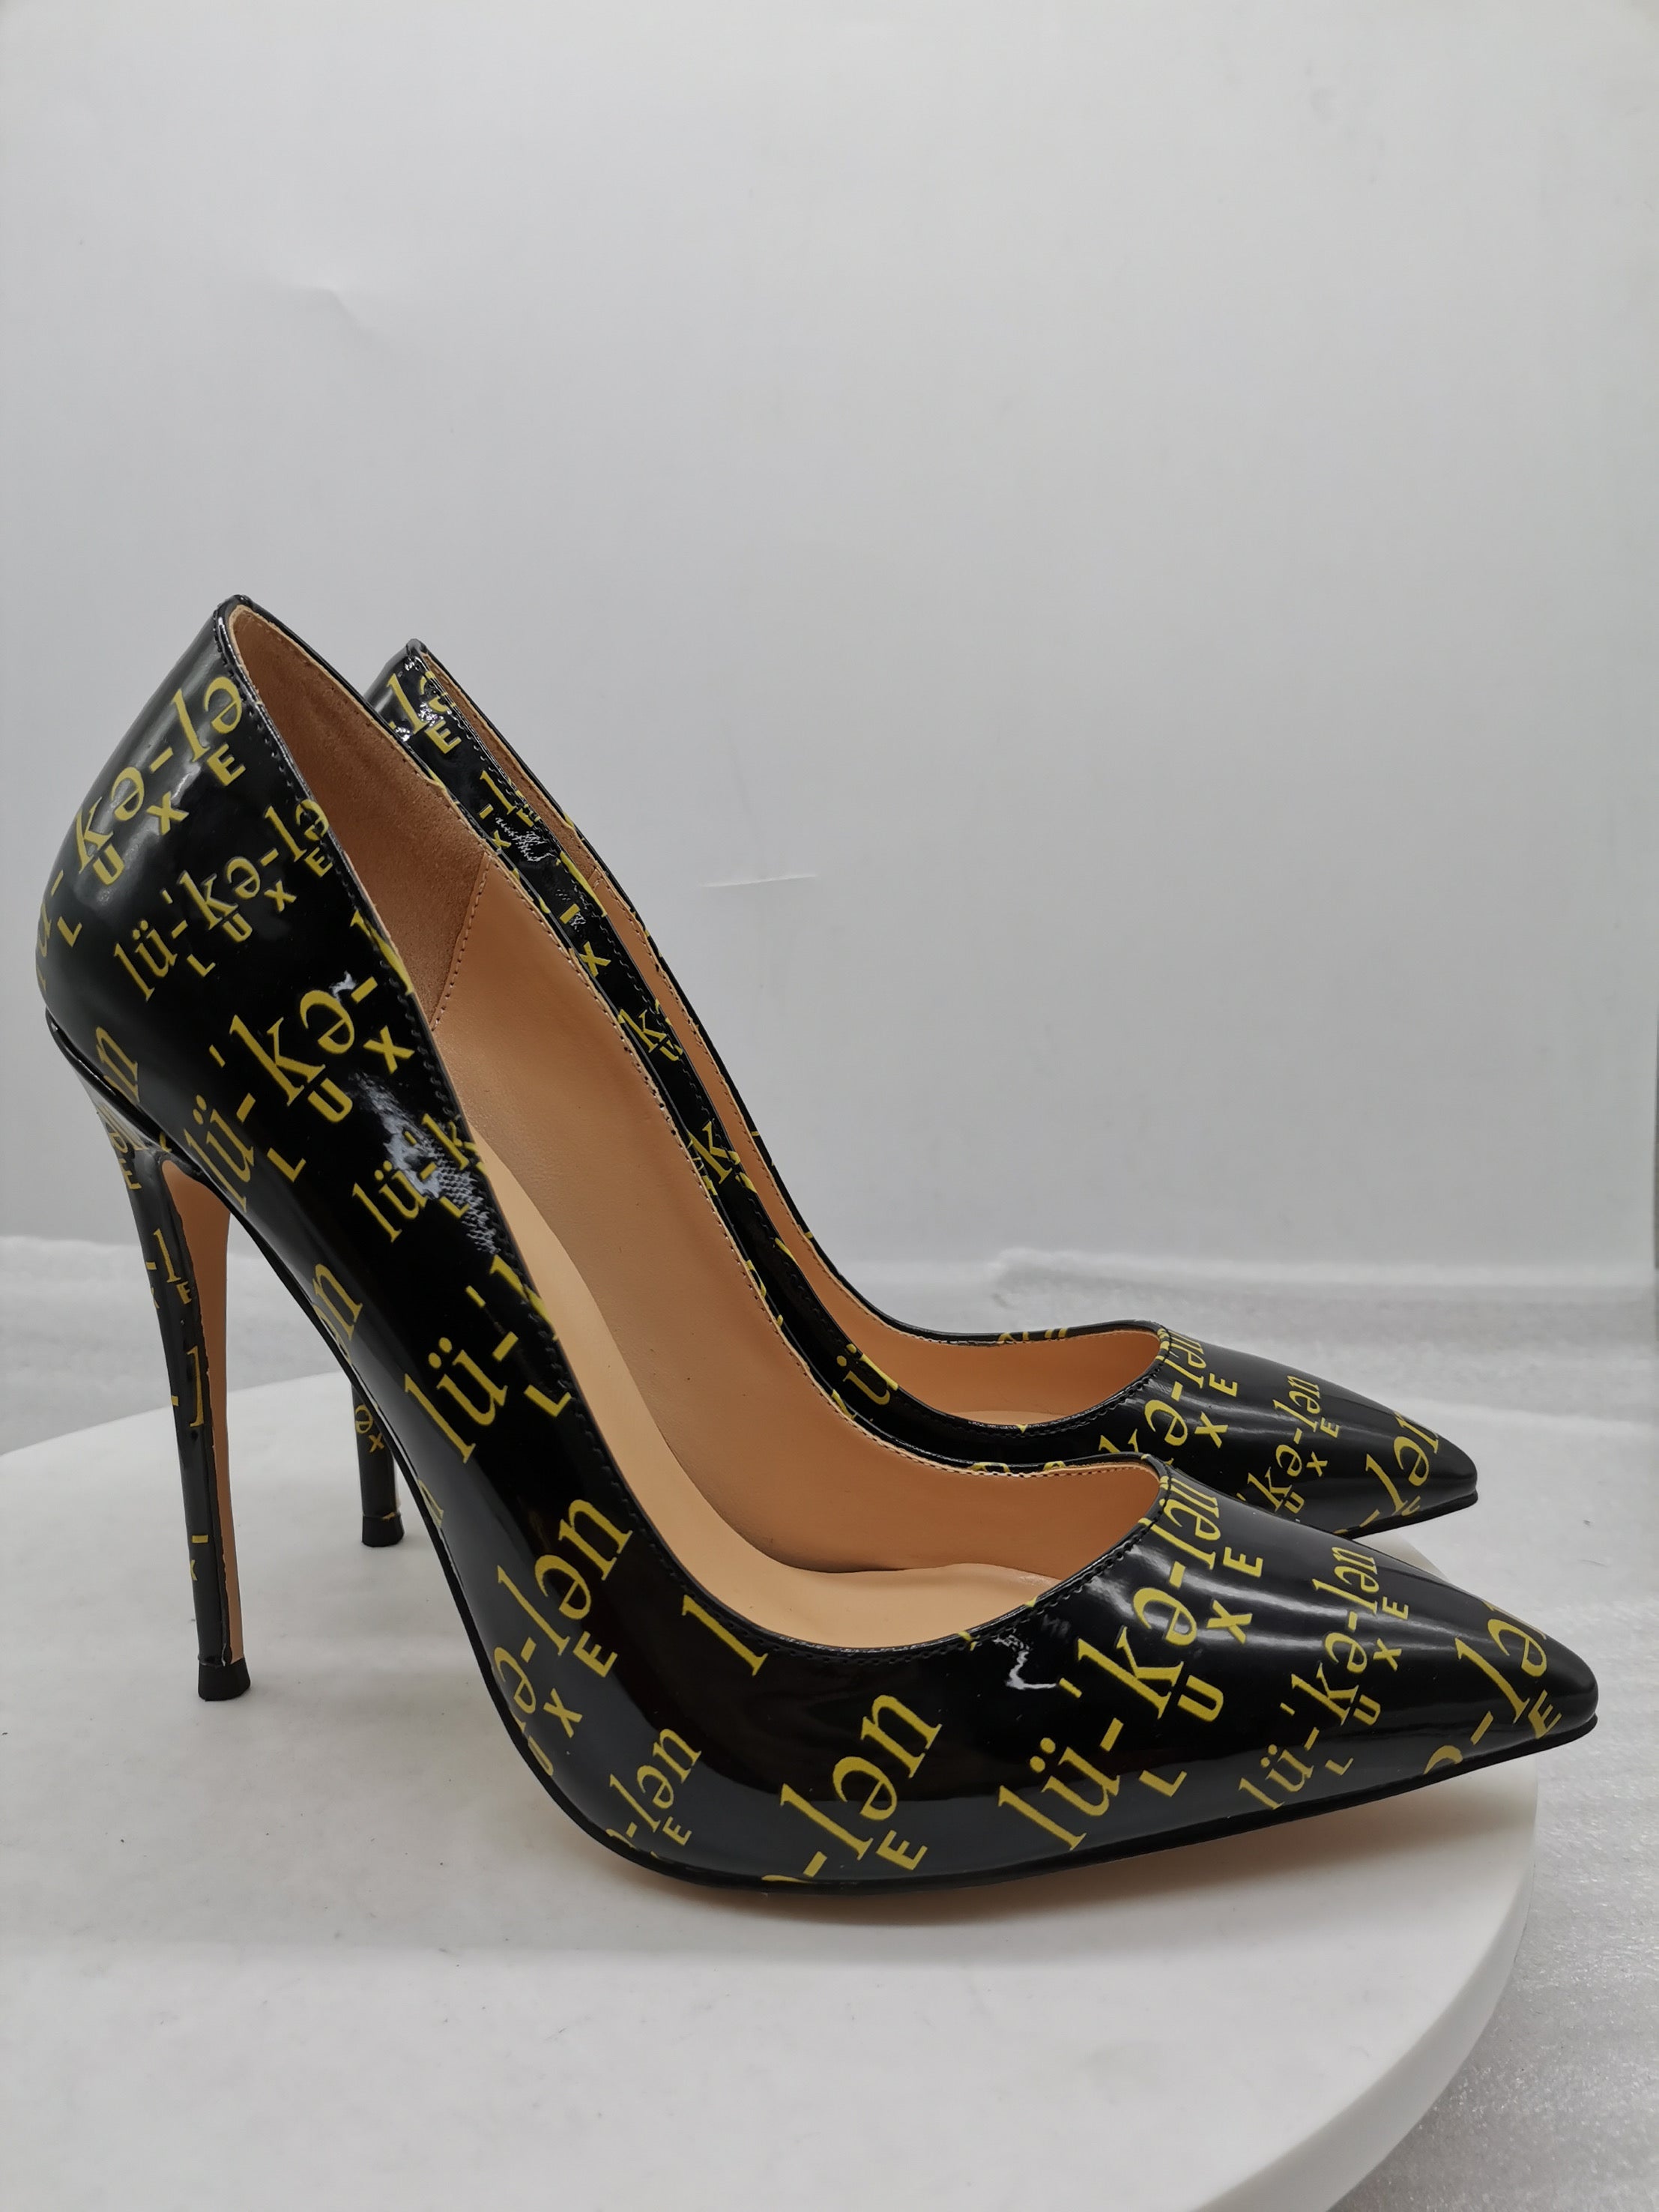 louis vuitton black and gold heels